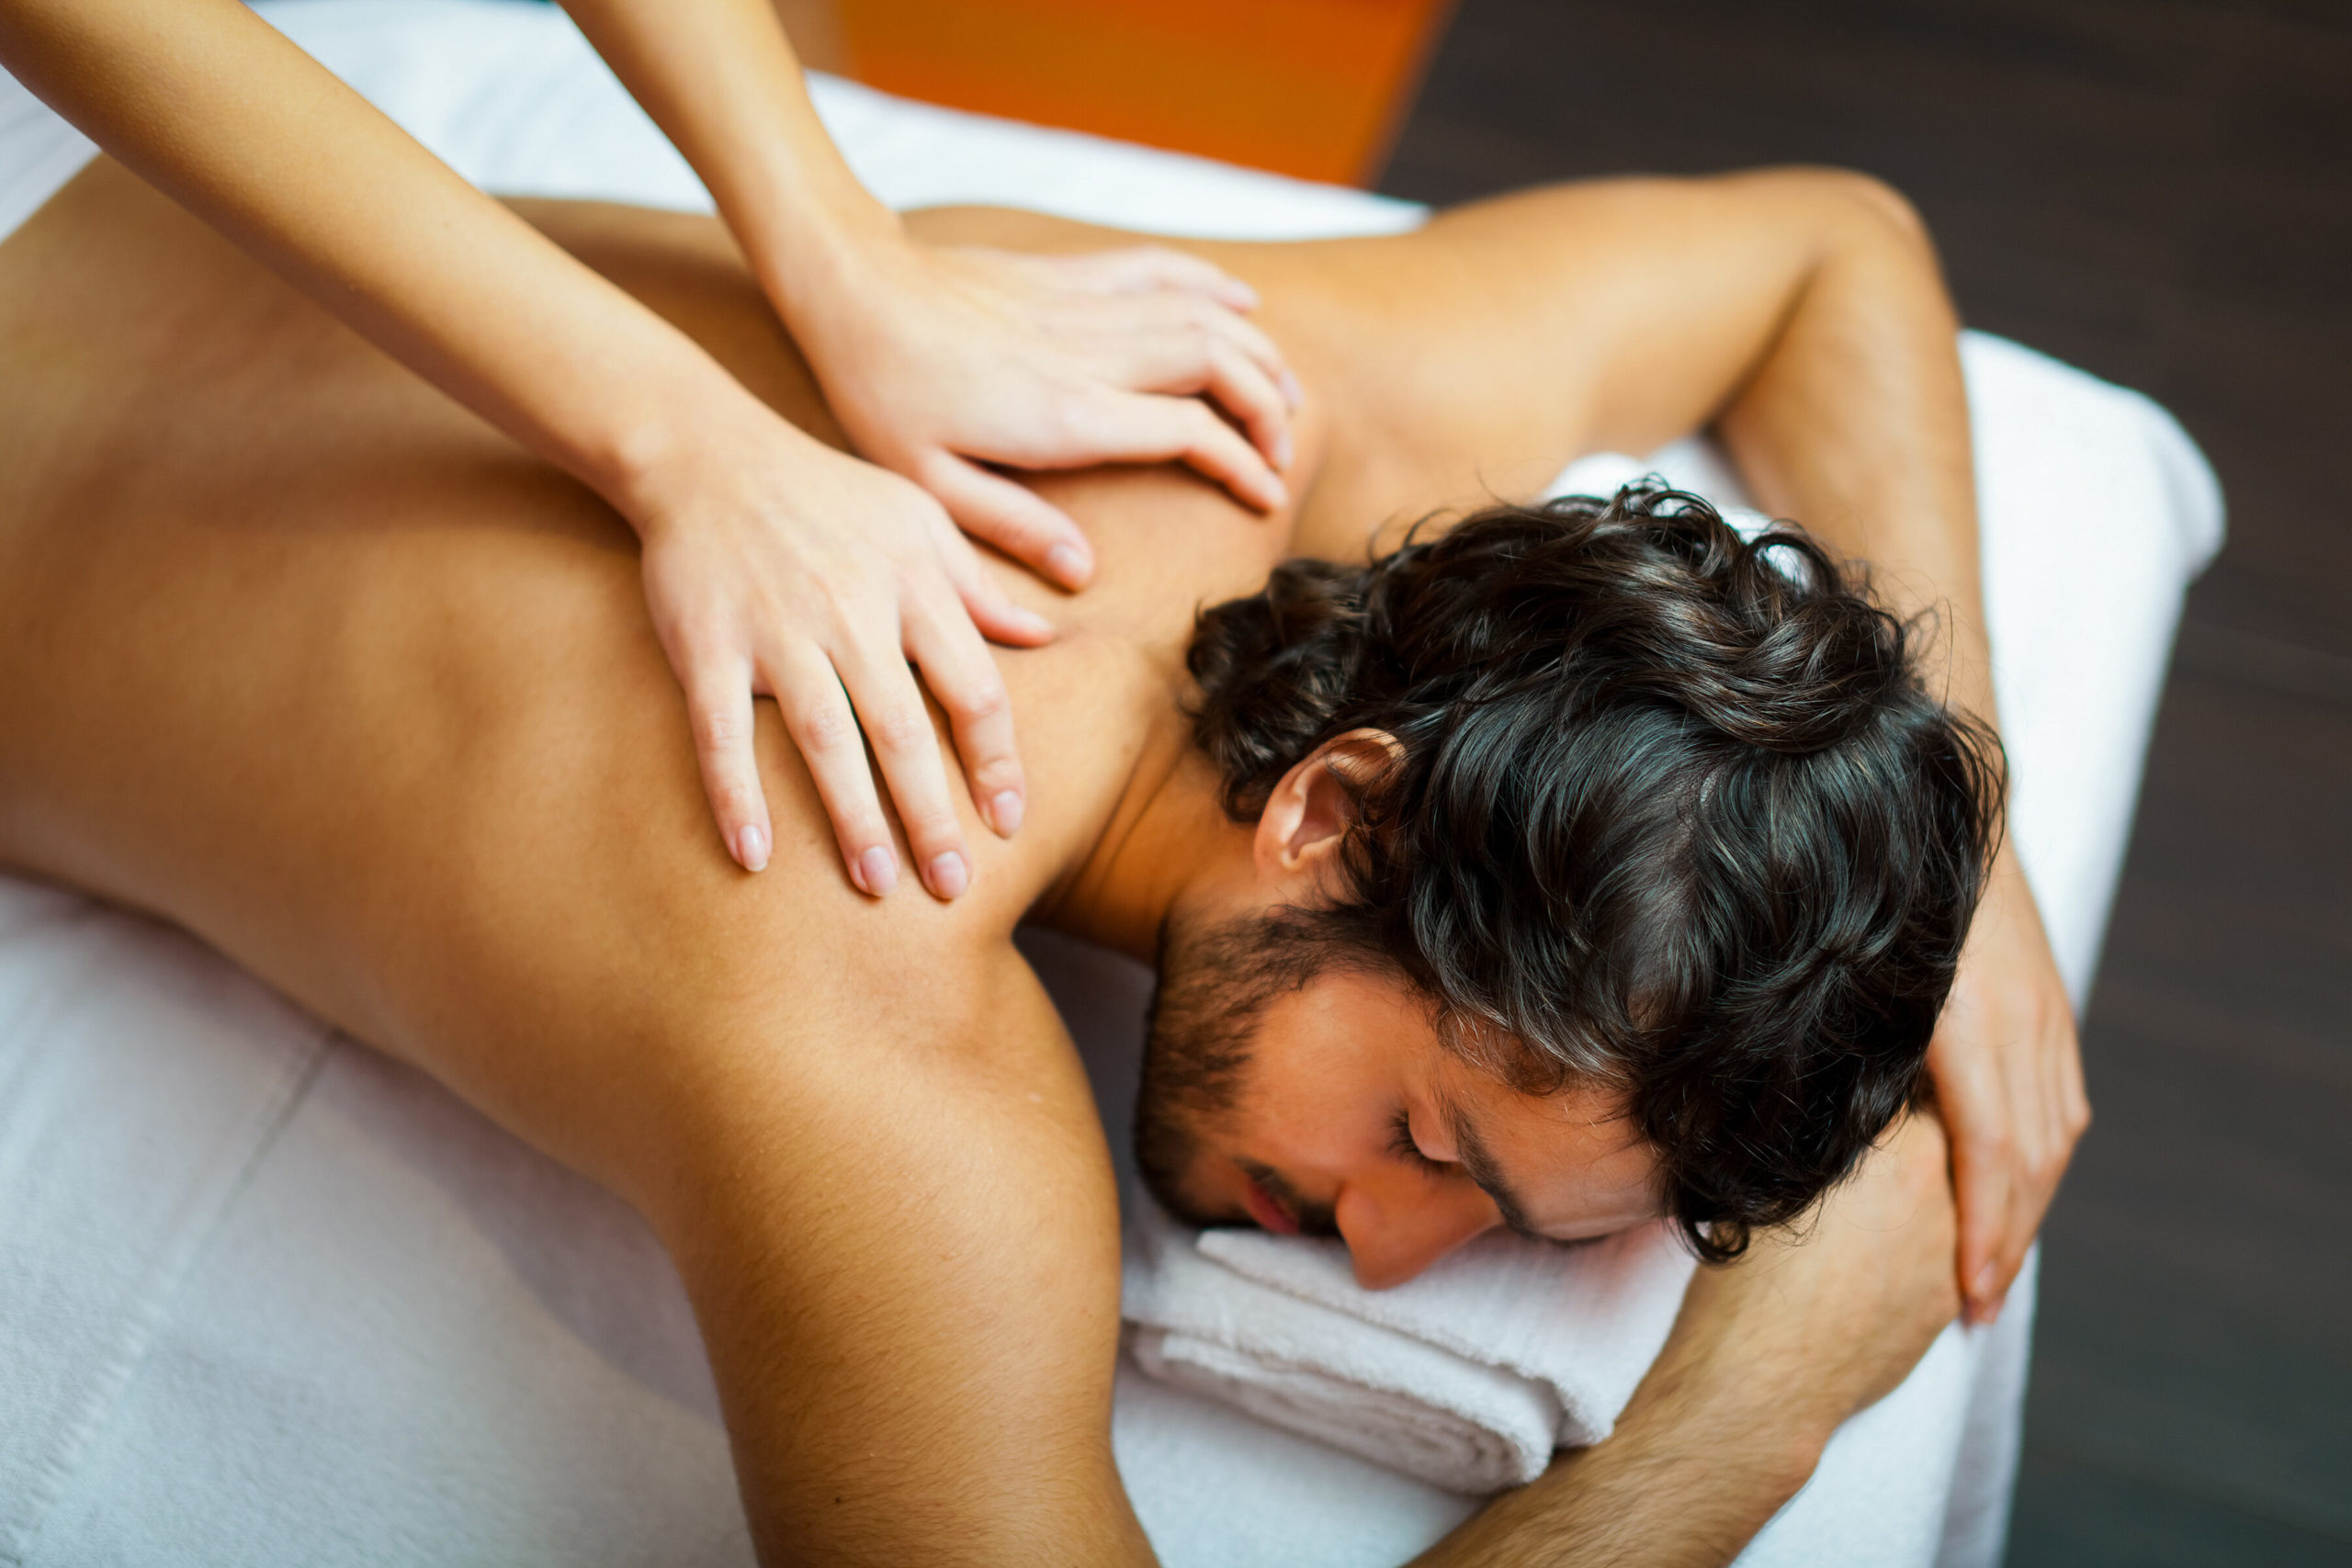 What Are The Benefits Of Lymphatic Drainage Massage?